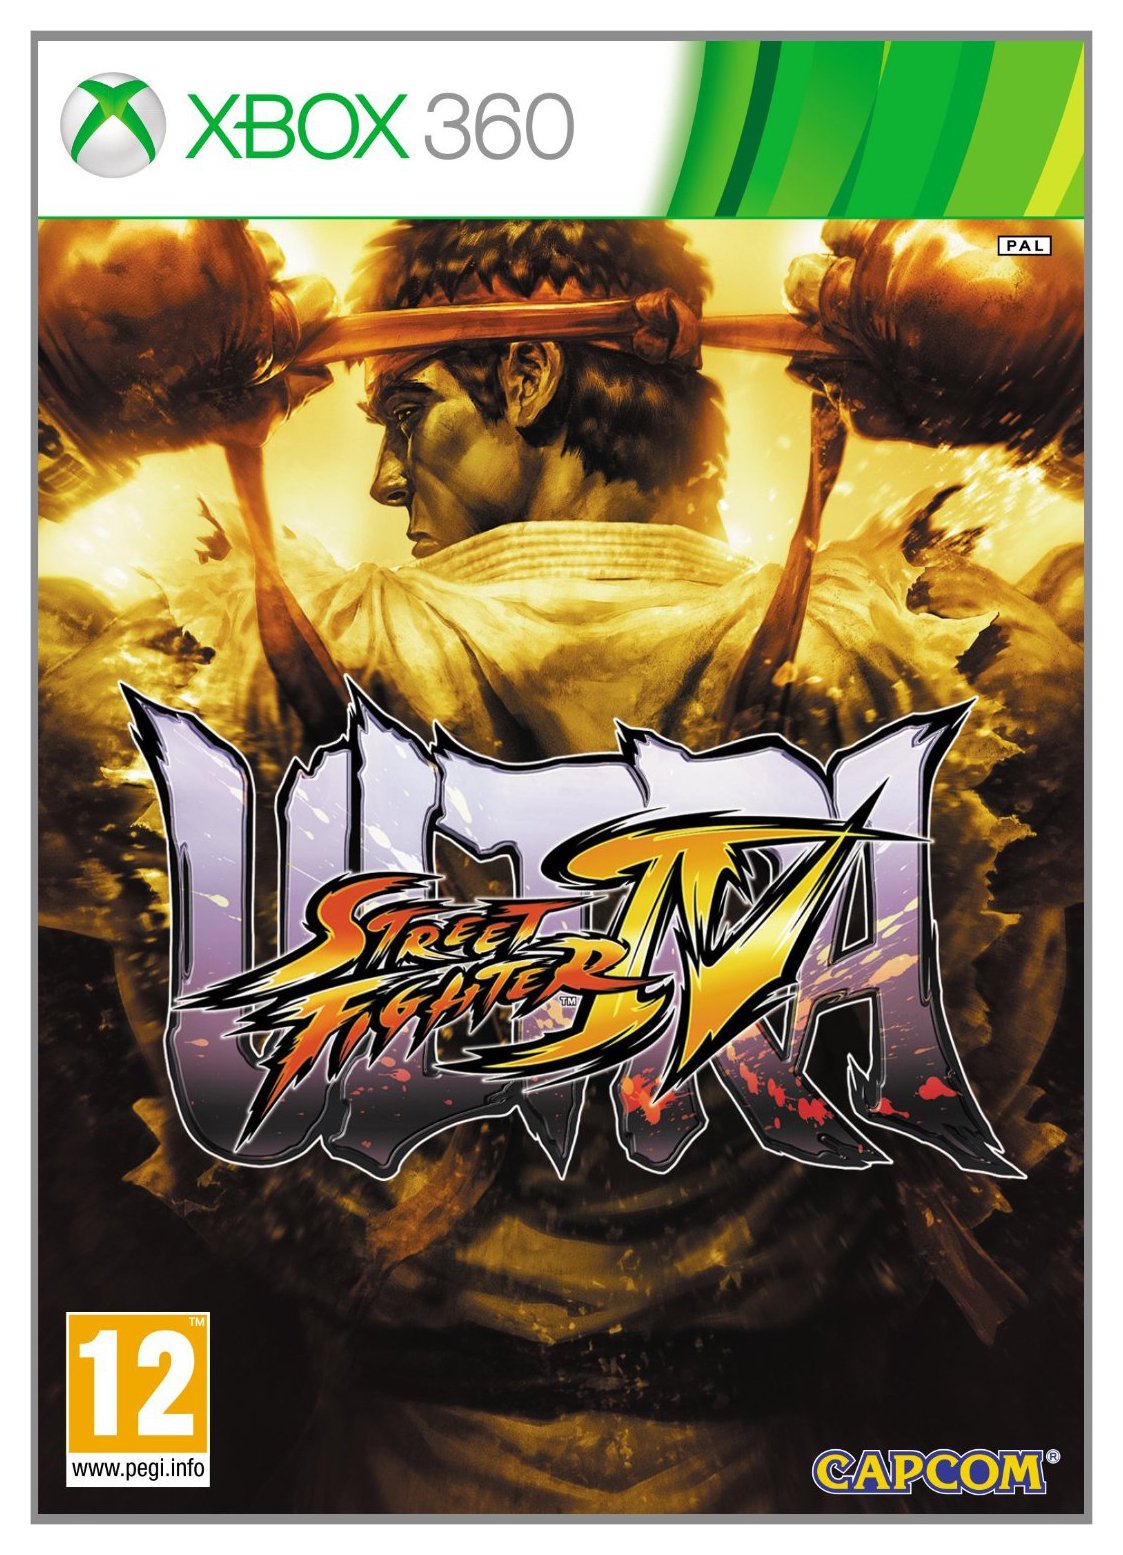 Ultra Steet Fighter 4 Xbox 360 Game